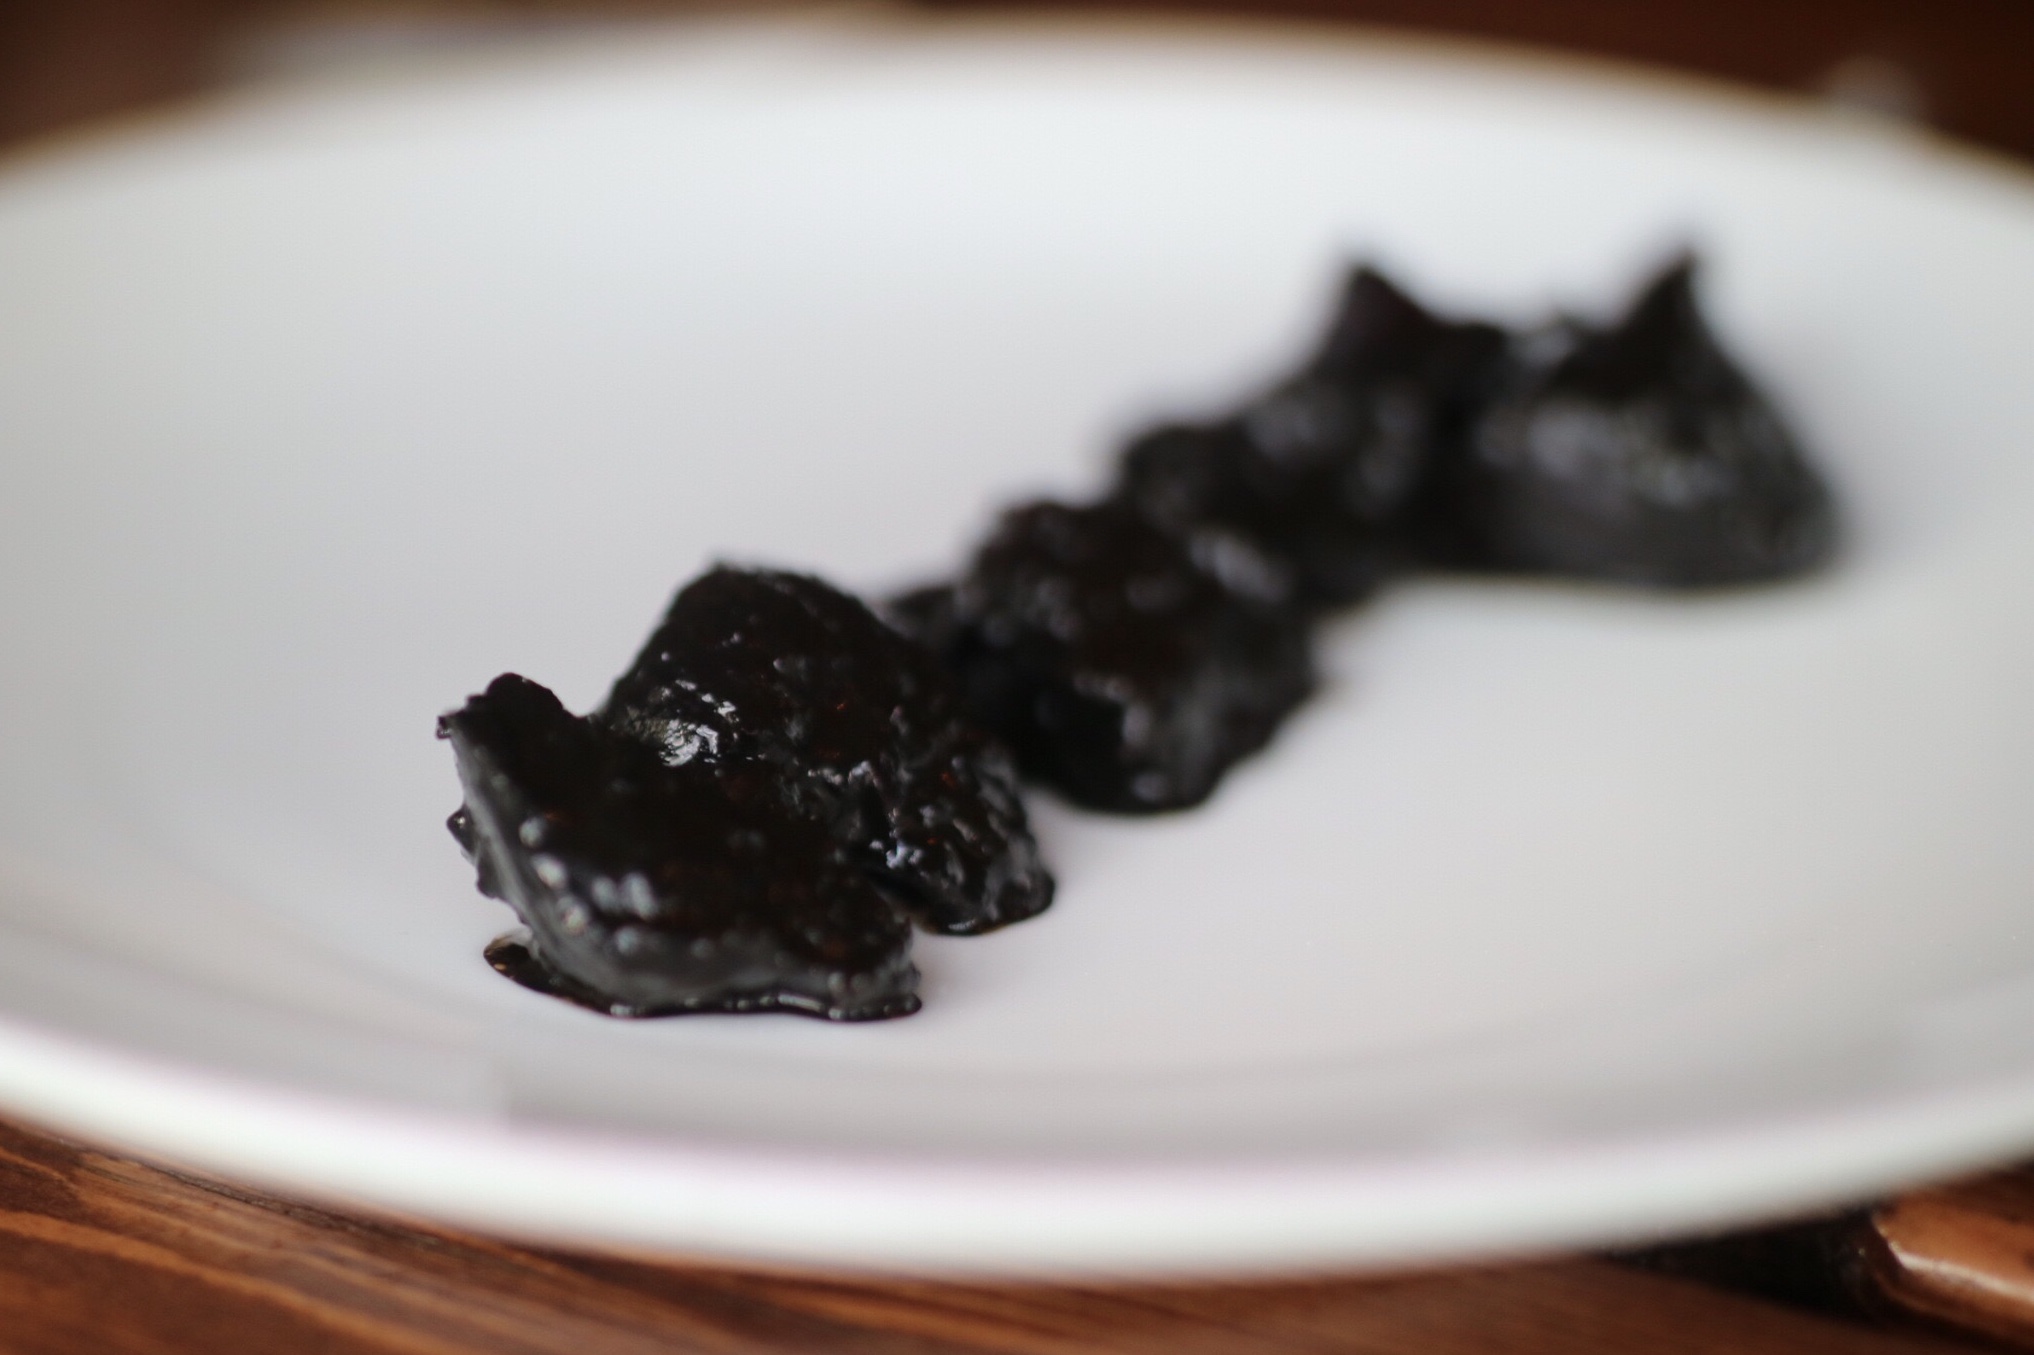 Roasted Beets with cuttlefish ink